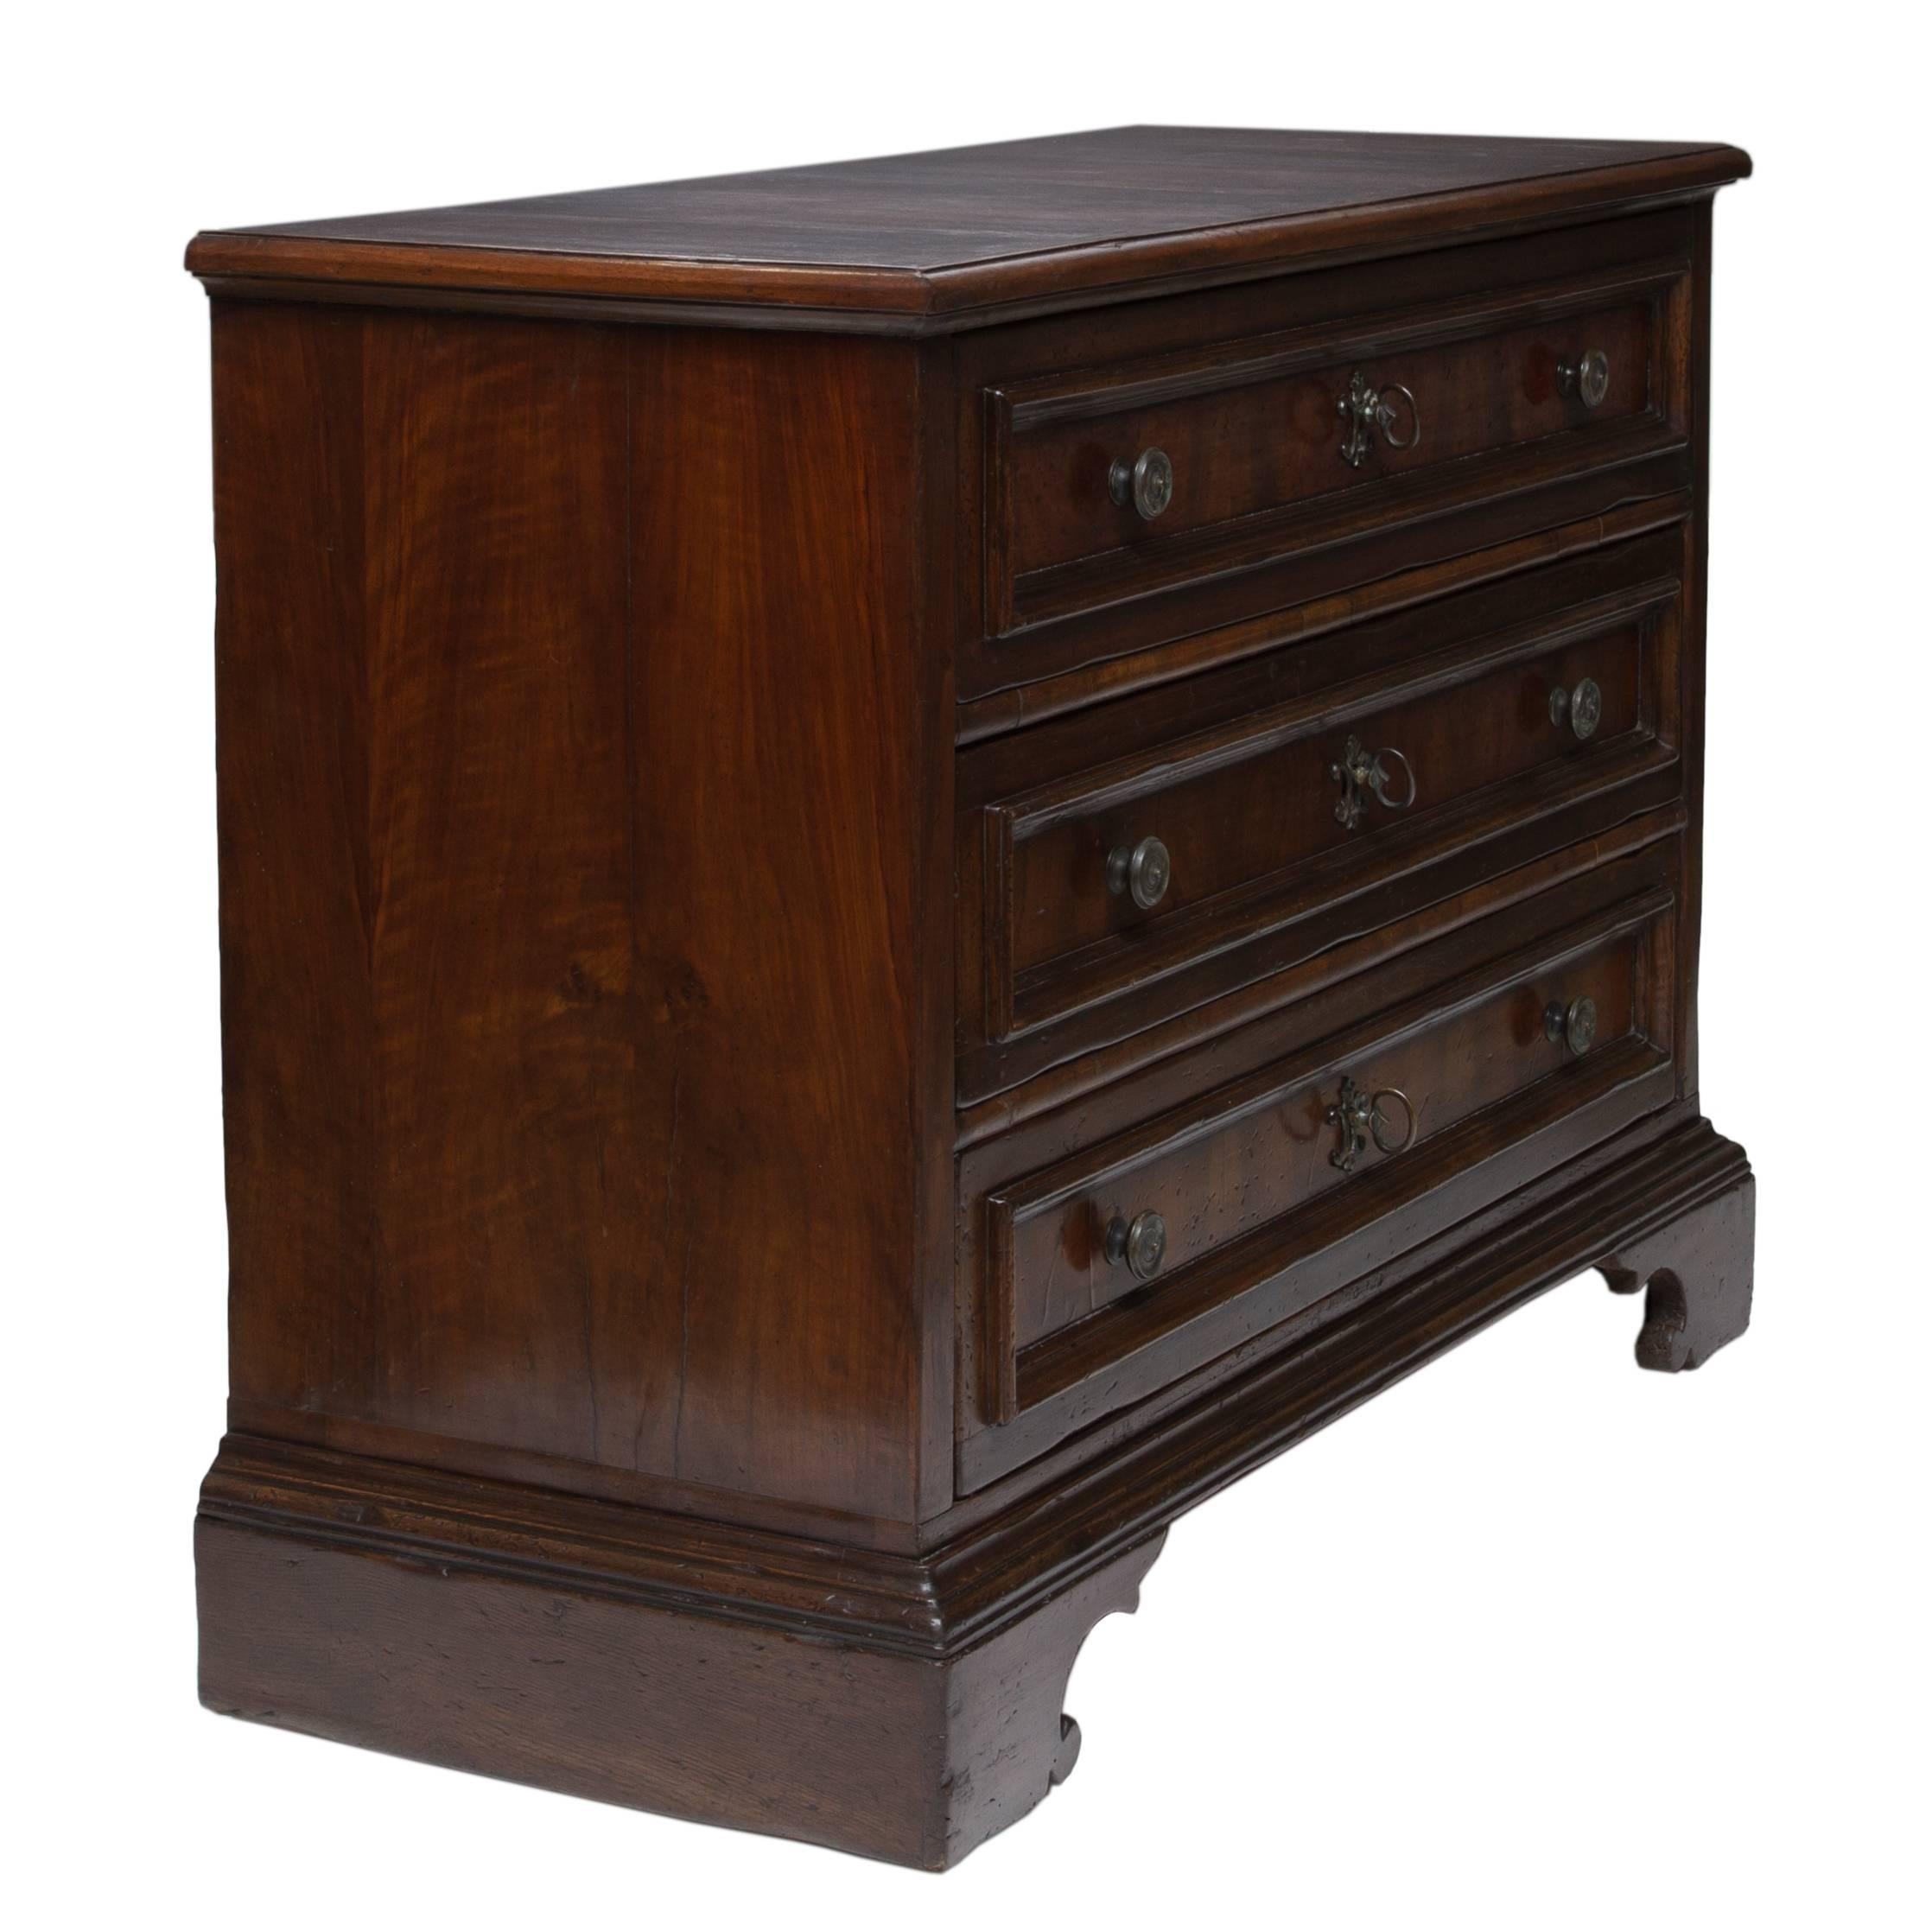 A superb Tuscan walnut commode with iron handles and escutcheons. Thick shaped moldings leading to cuts of figured walnut veneers. Wonderful condition and patina. Clean, circa 1870.